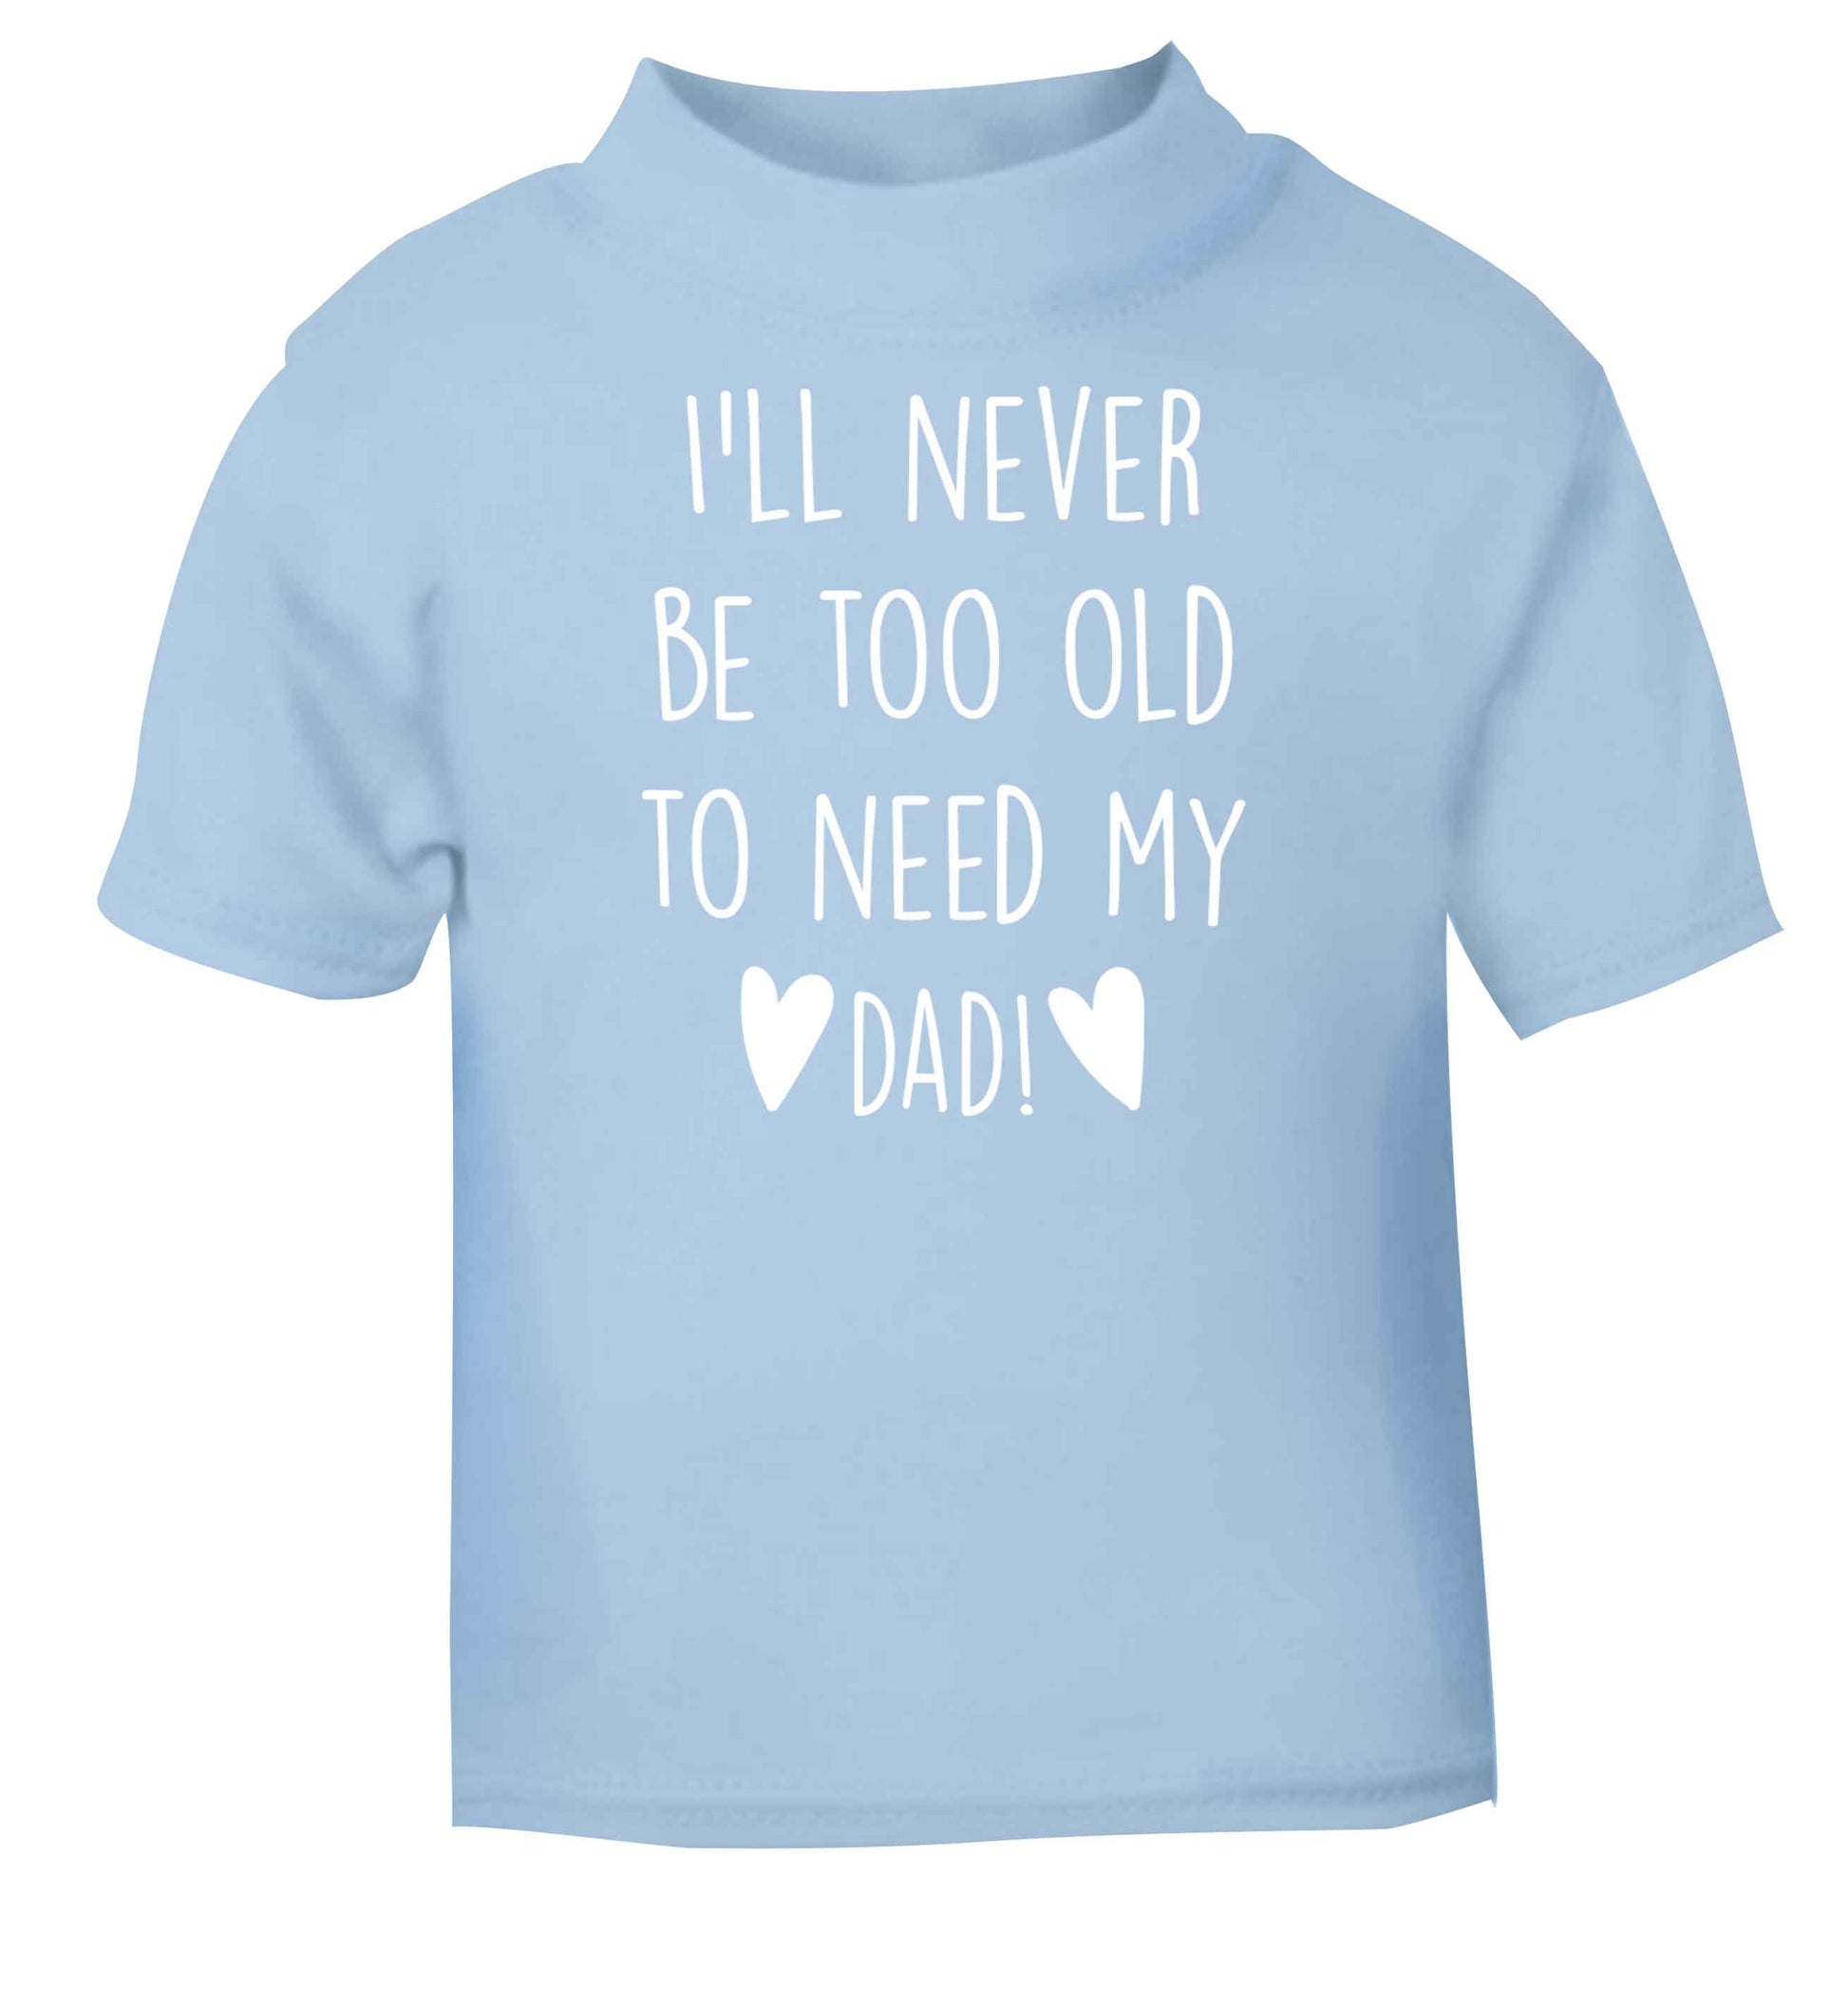 I'll never be too old to need my dad light blue baby toddler Tshirt 2 Years